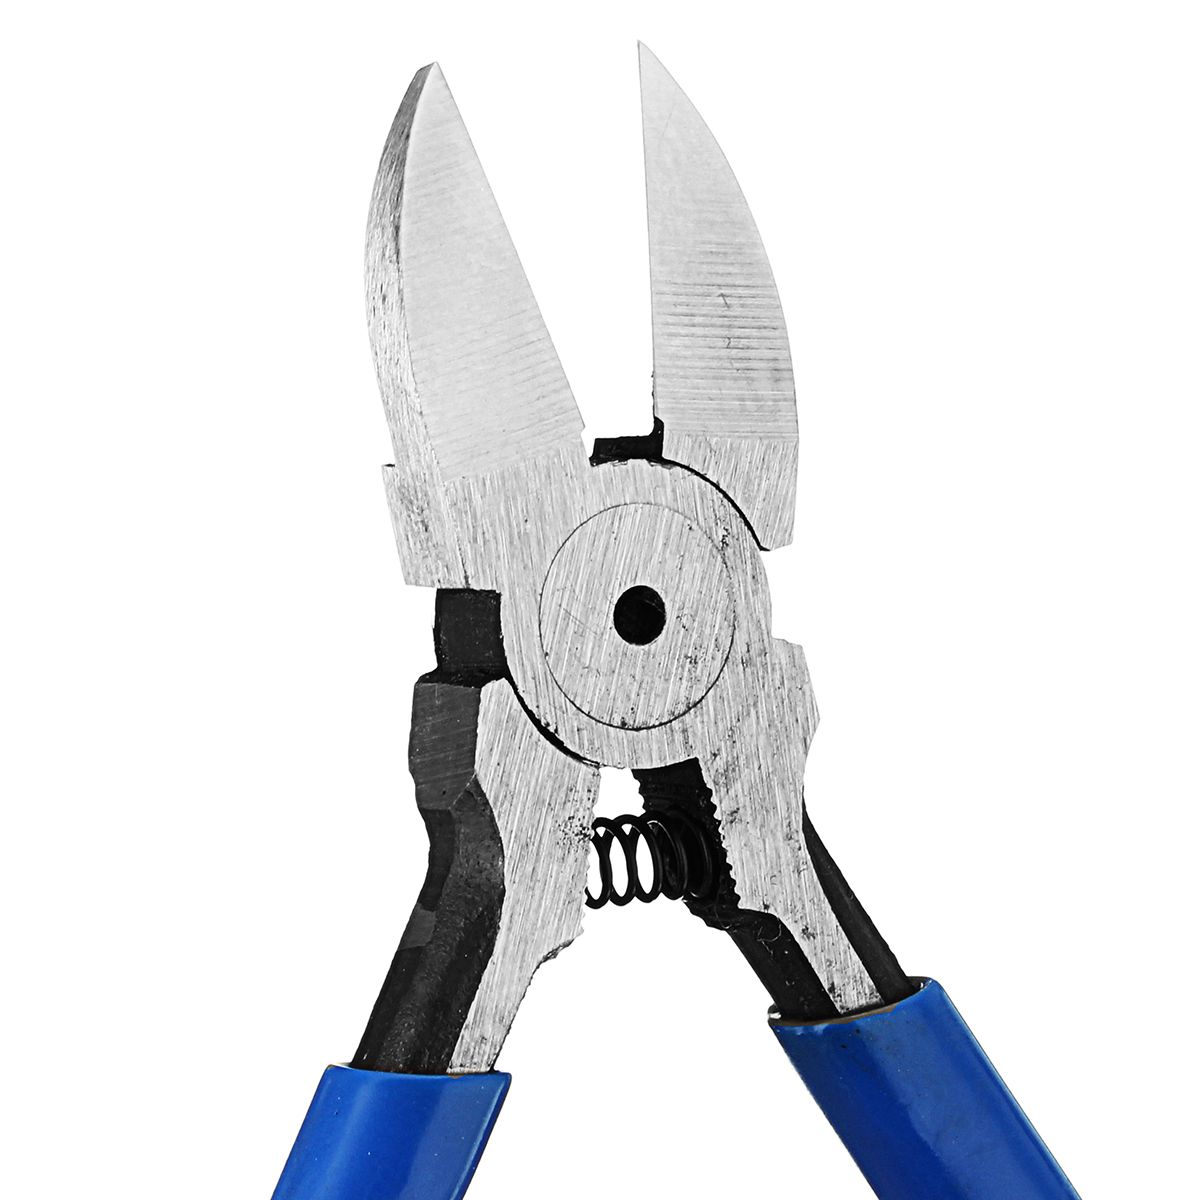 Wire-Cutter-Pliers-Small-Diagonal-Flush-Wire-Cutters-Side-Cutter-Pliers-Diagonal-Flush-Cutters-1368545